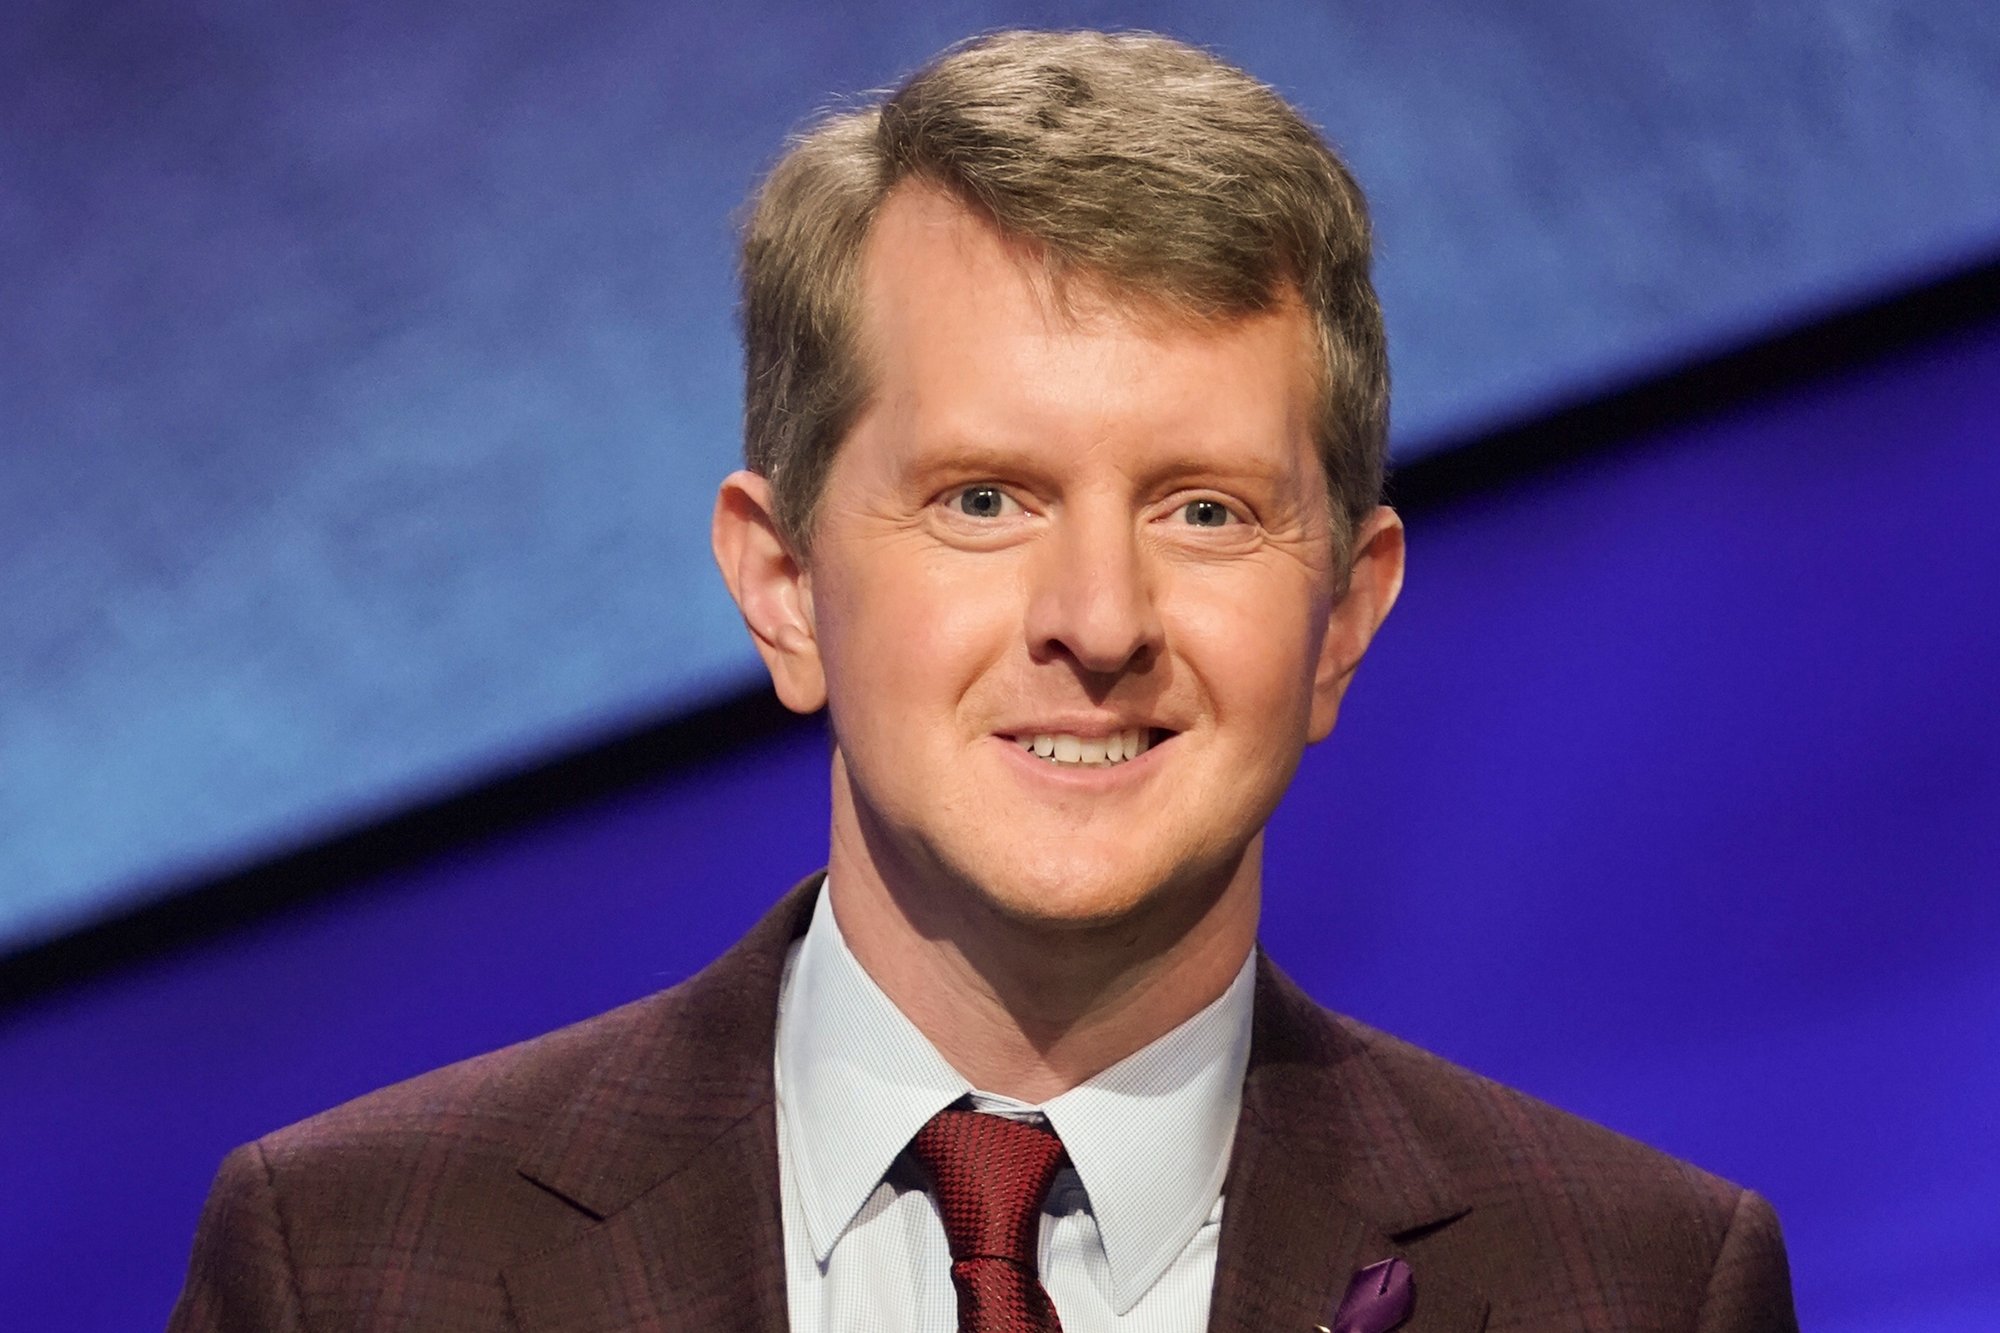 'Jeopardy!' host and champion Ken Jennings smiling wearing a suit and tie